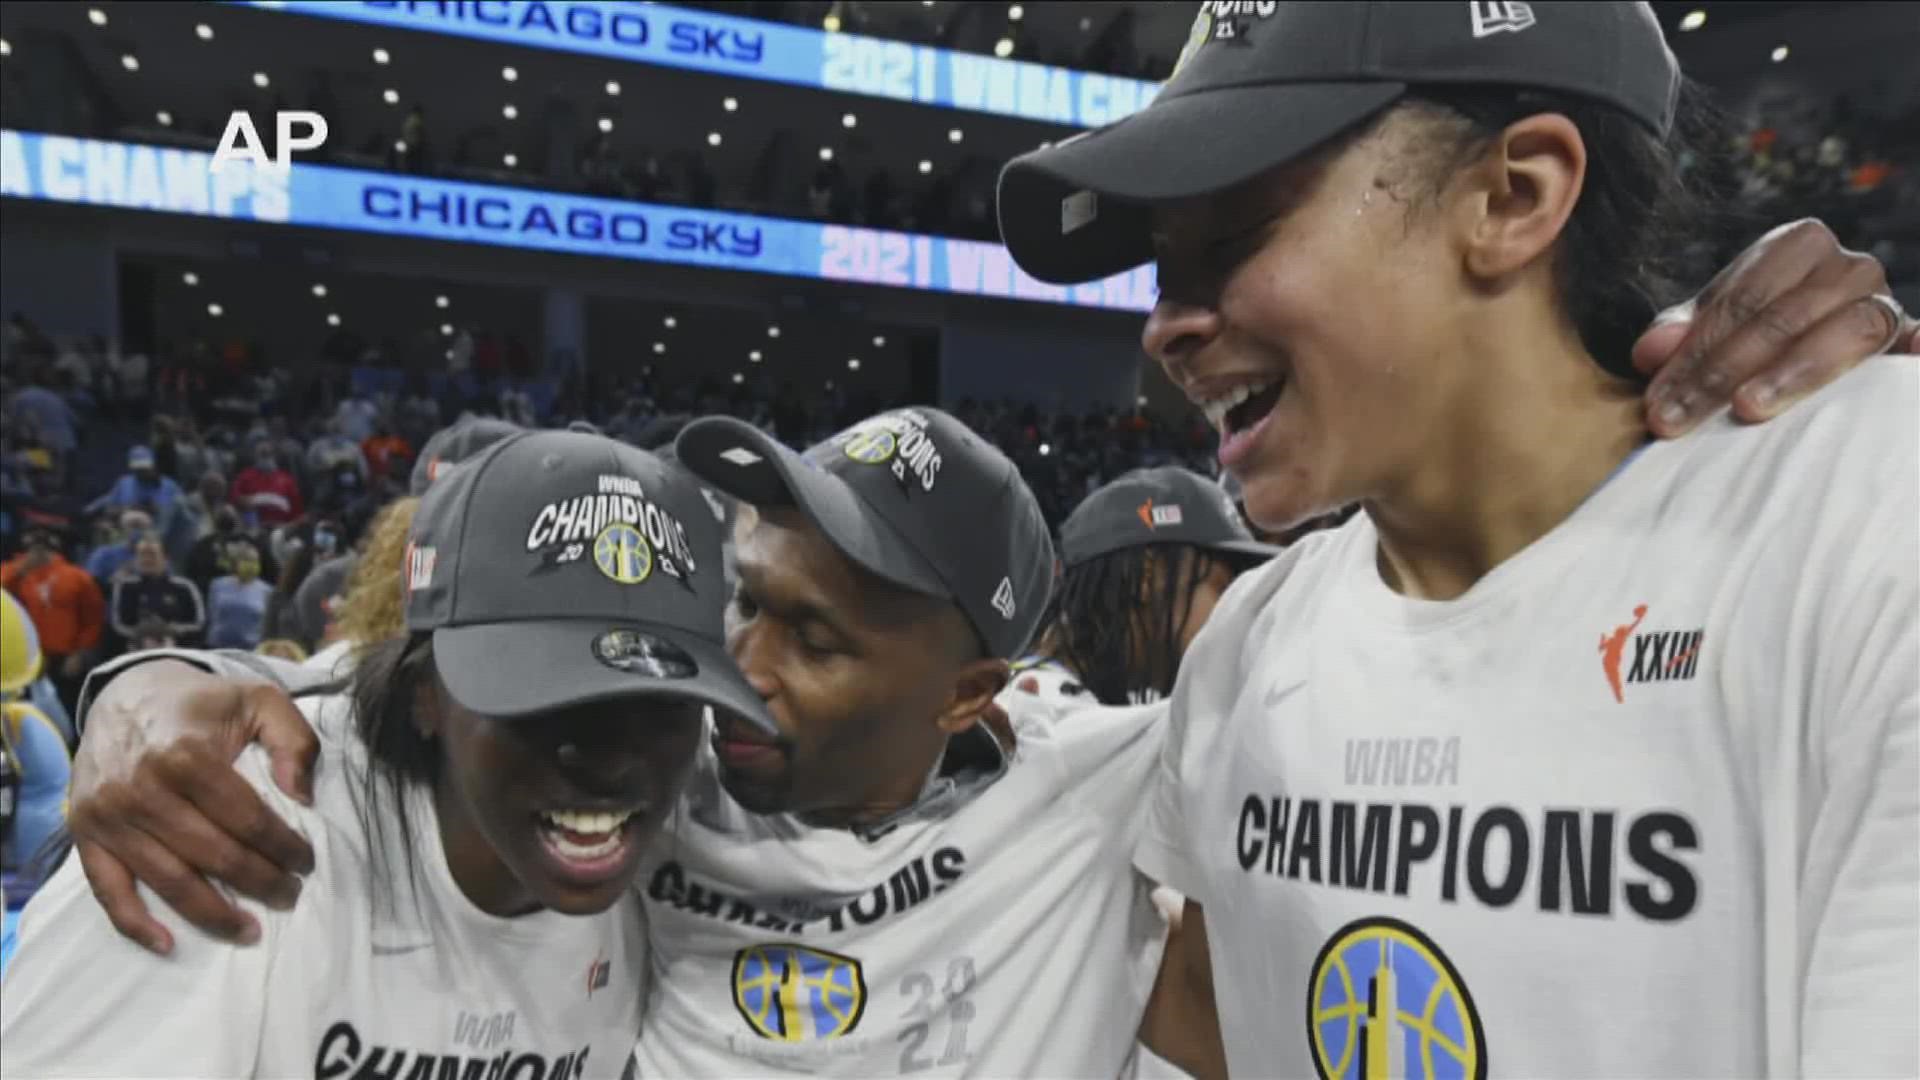 The Chicago Sky head coach talks about his time in Memphis growing up and how basketball has taken him to places he never thought possible.